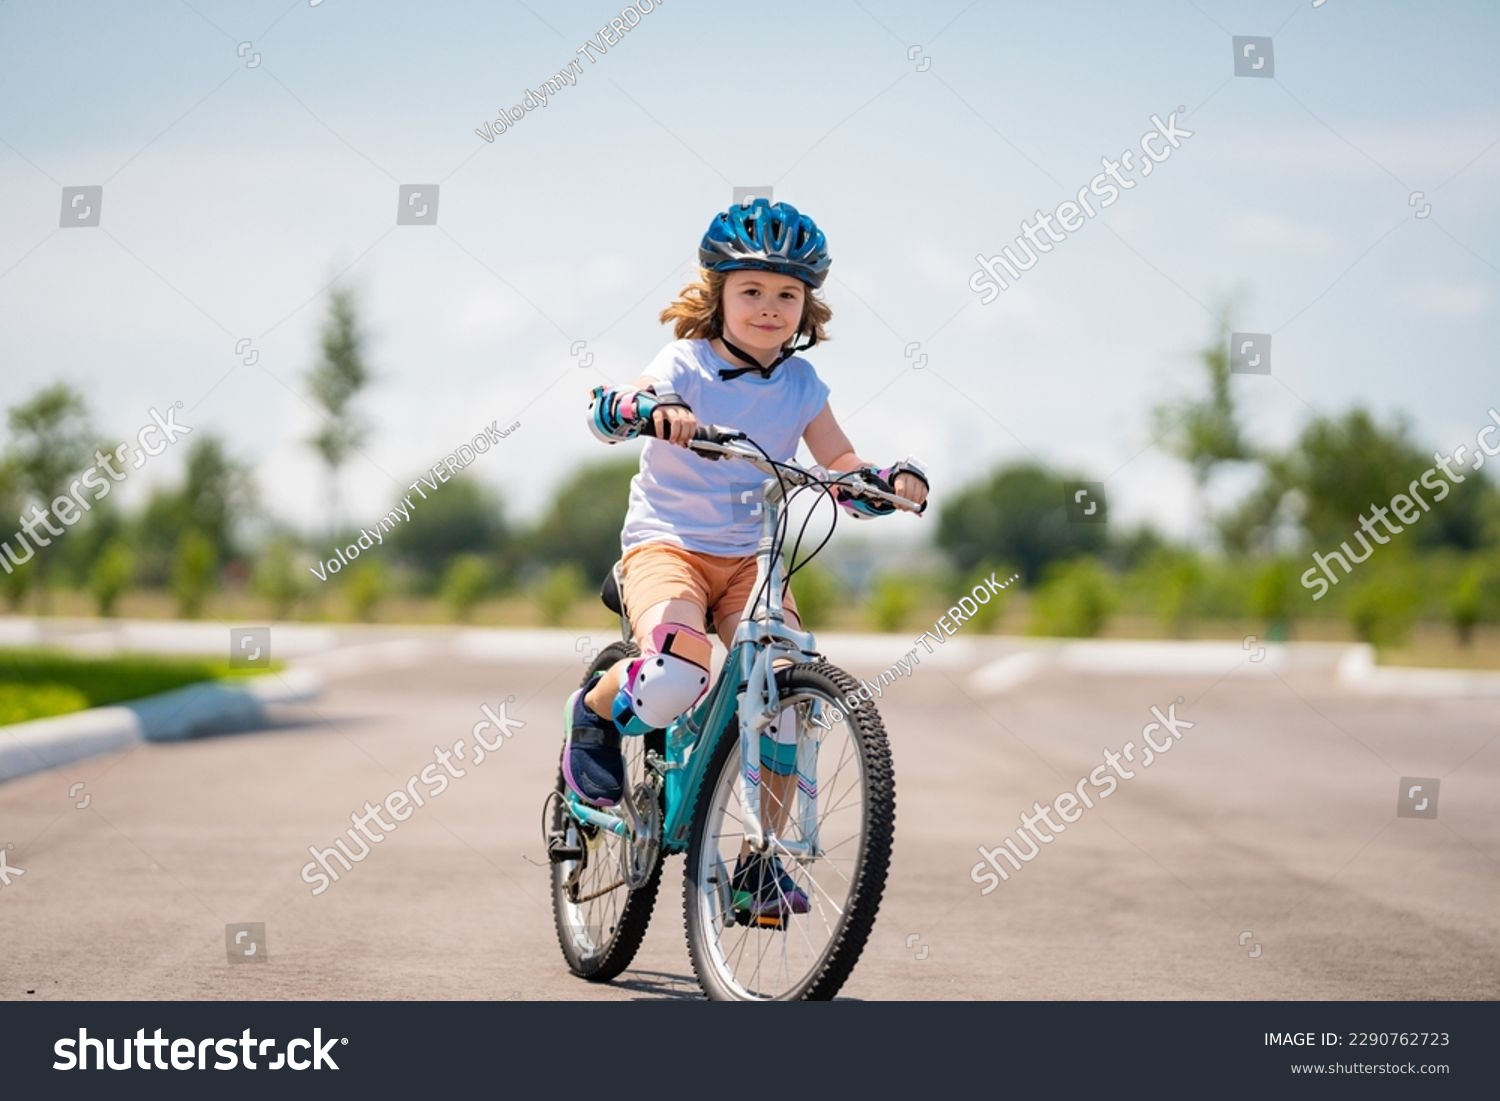 Child in safety helmet riding bike. Boy riding bike wearing a helmet outside. Child in safety helmet riding bike. Little kid boy learns to ride a bike. Kid on bicycle. Happy child in helmet riding a #2290762723